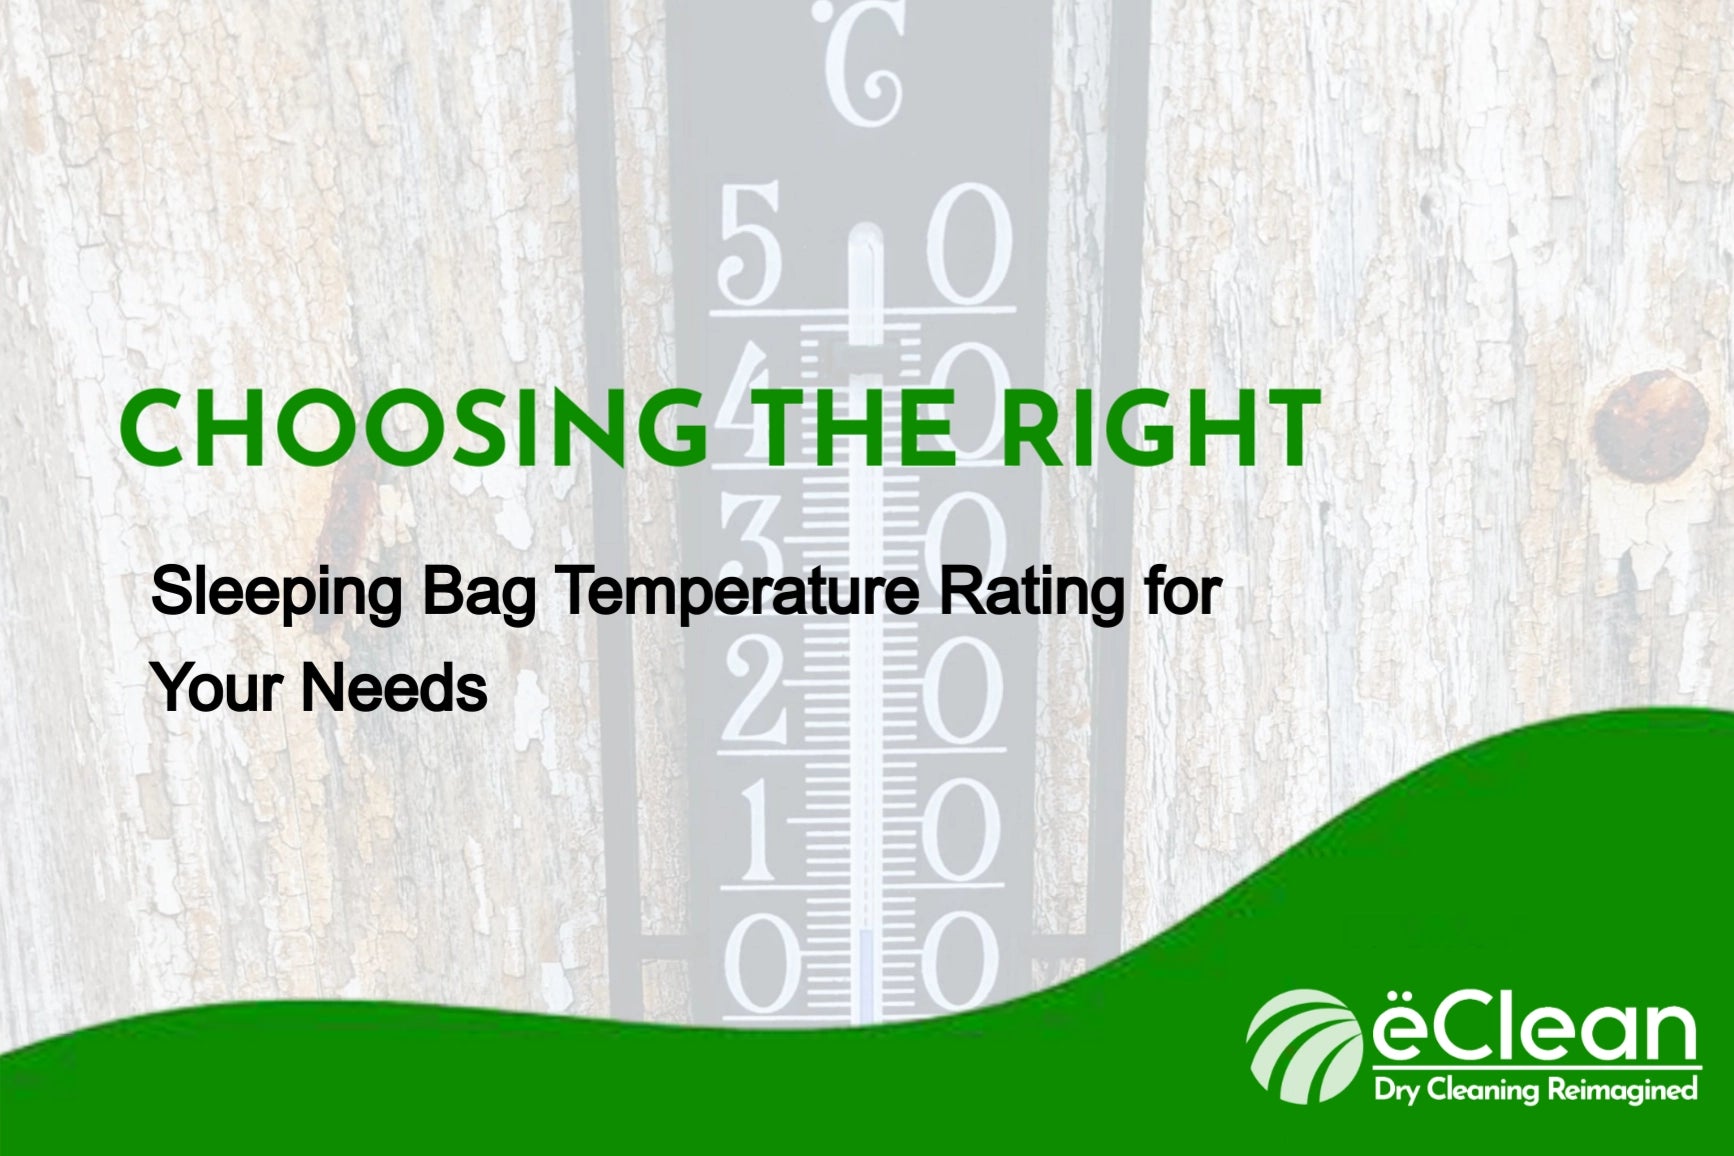 Choosing the Right Sleeping Bag Temperature Rating for Your Needs